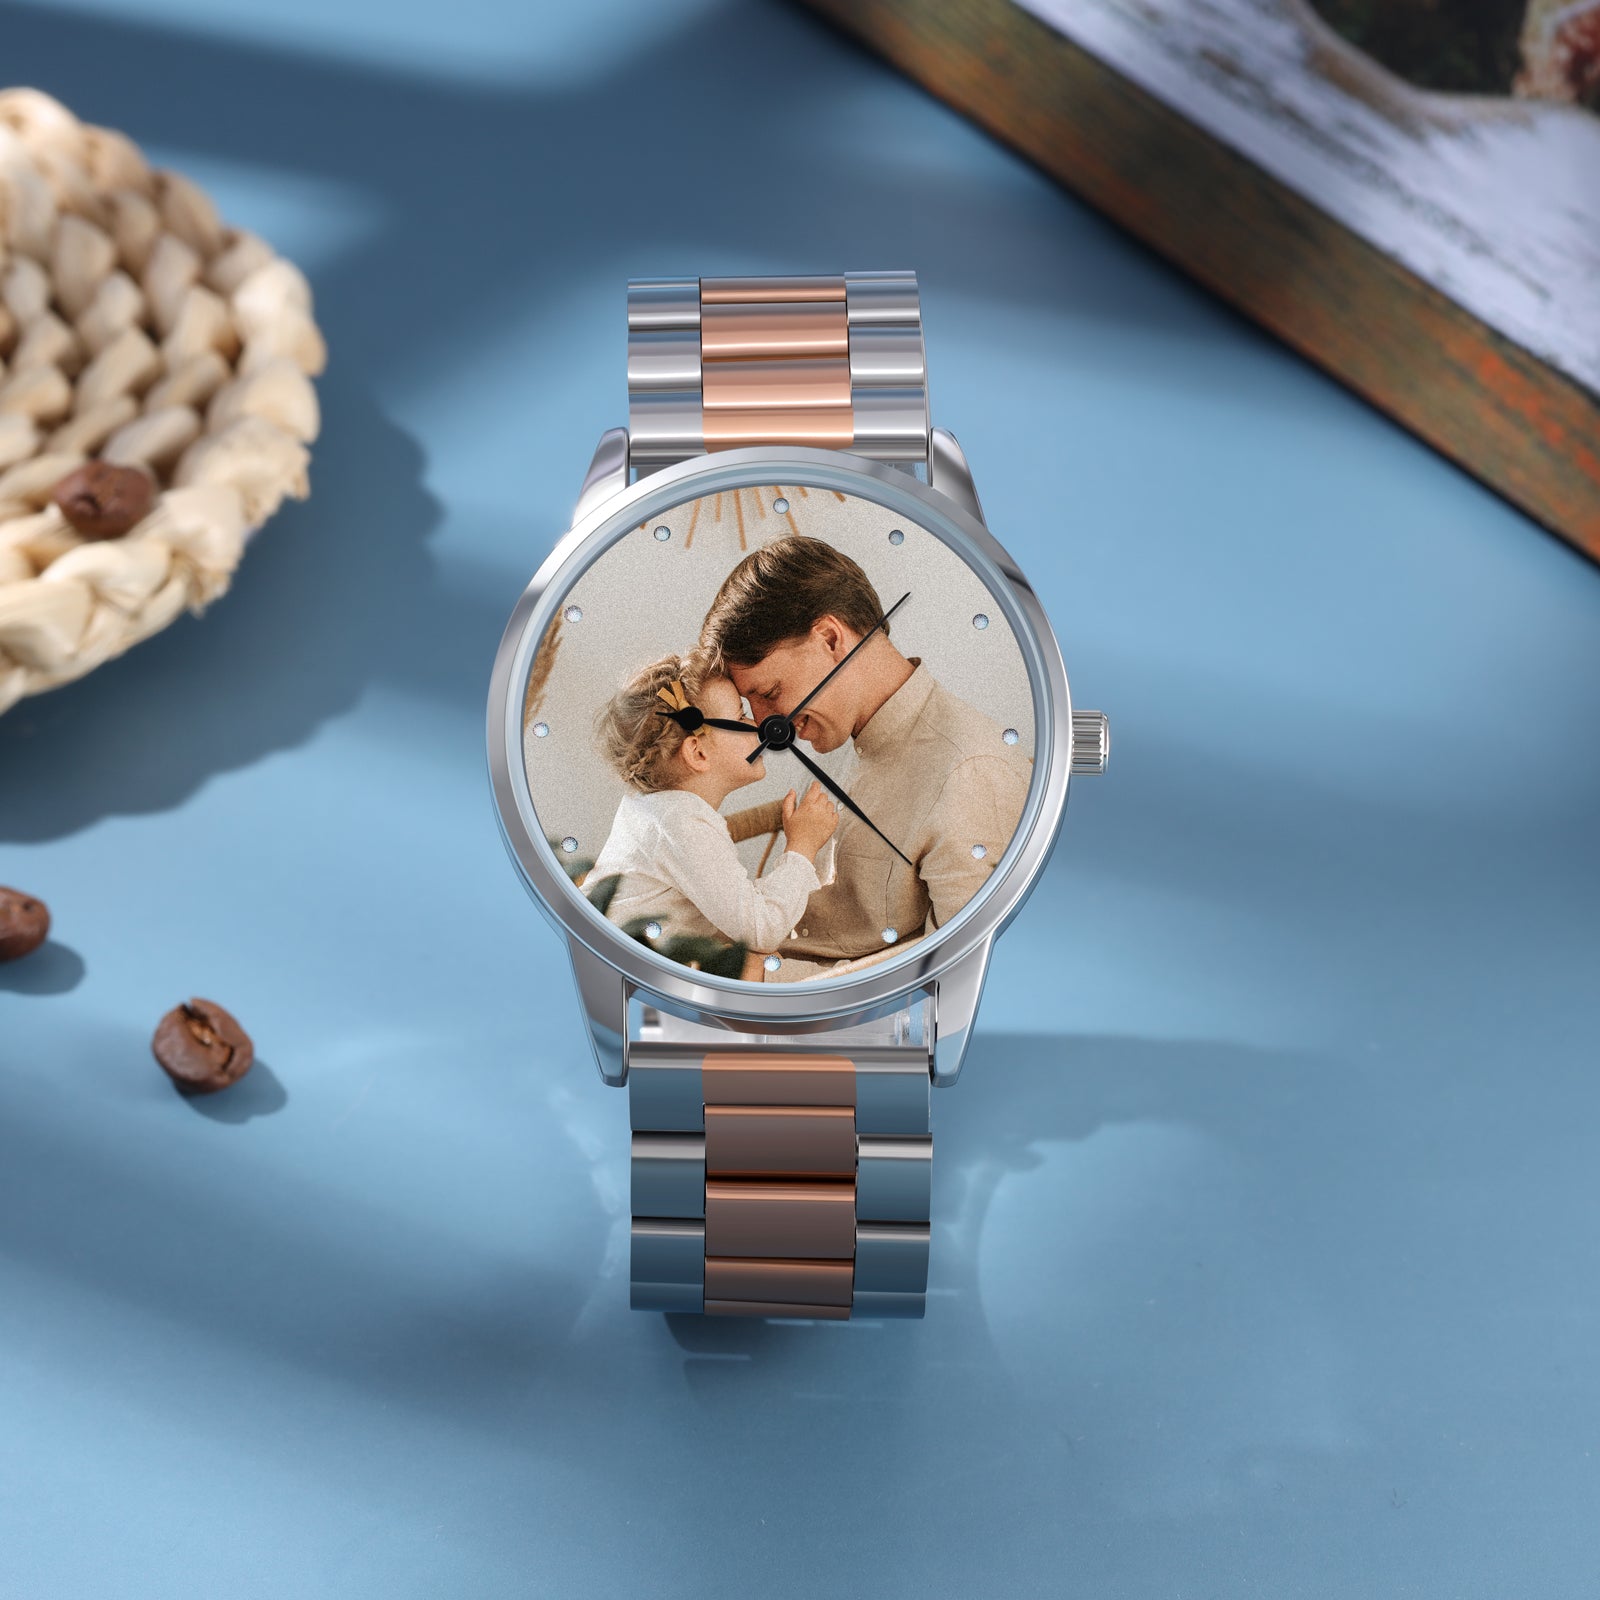 ThinkEngraved Custom watch Personalized Men's Photo Watch With Engraving Silver Rose Gold Father's Day